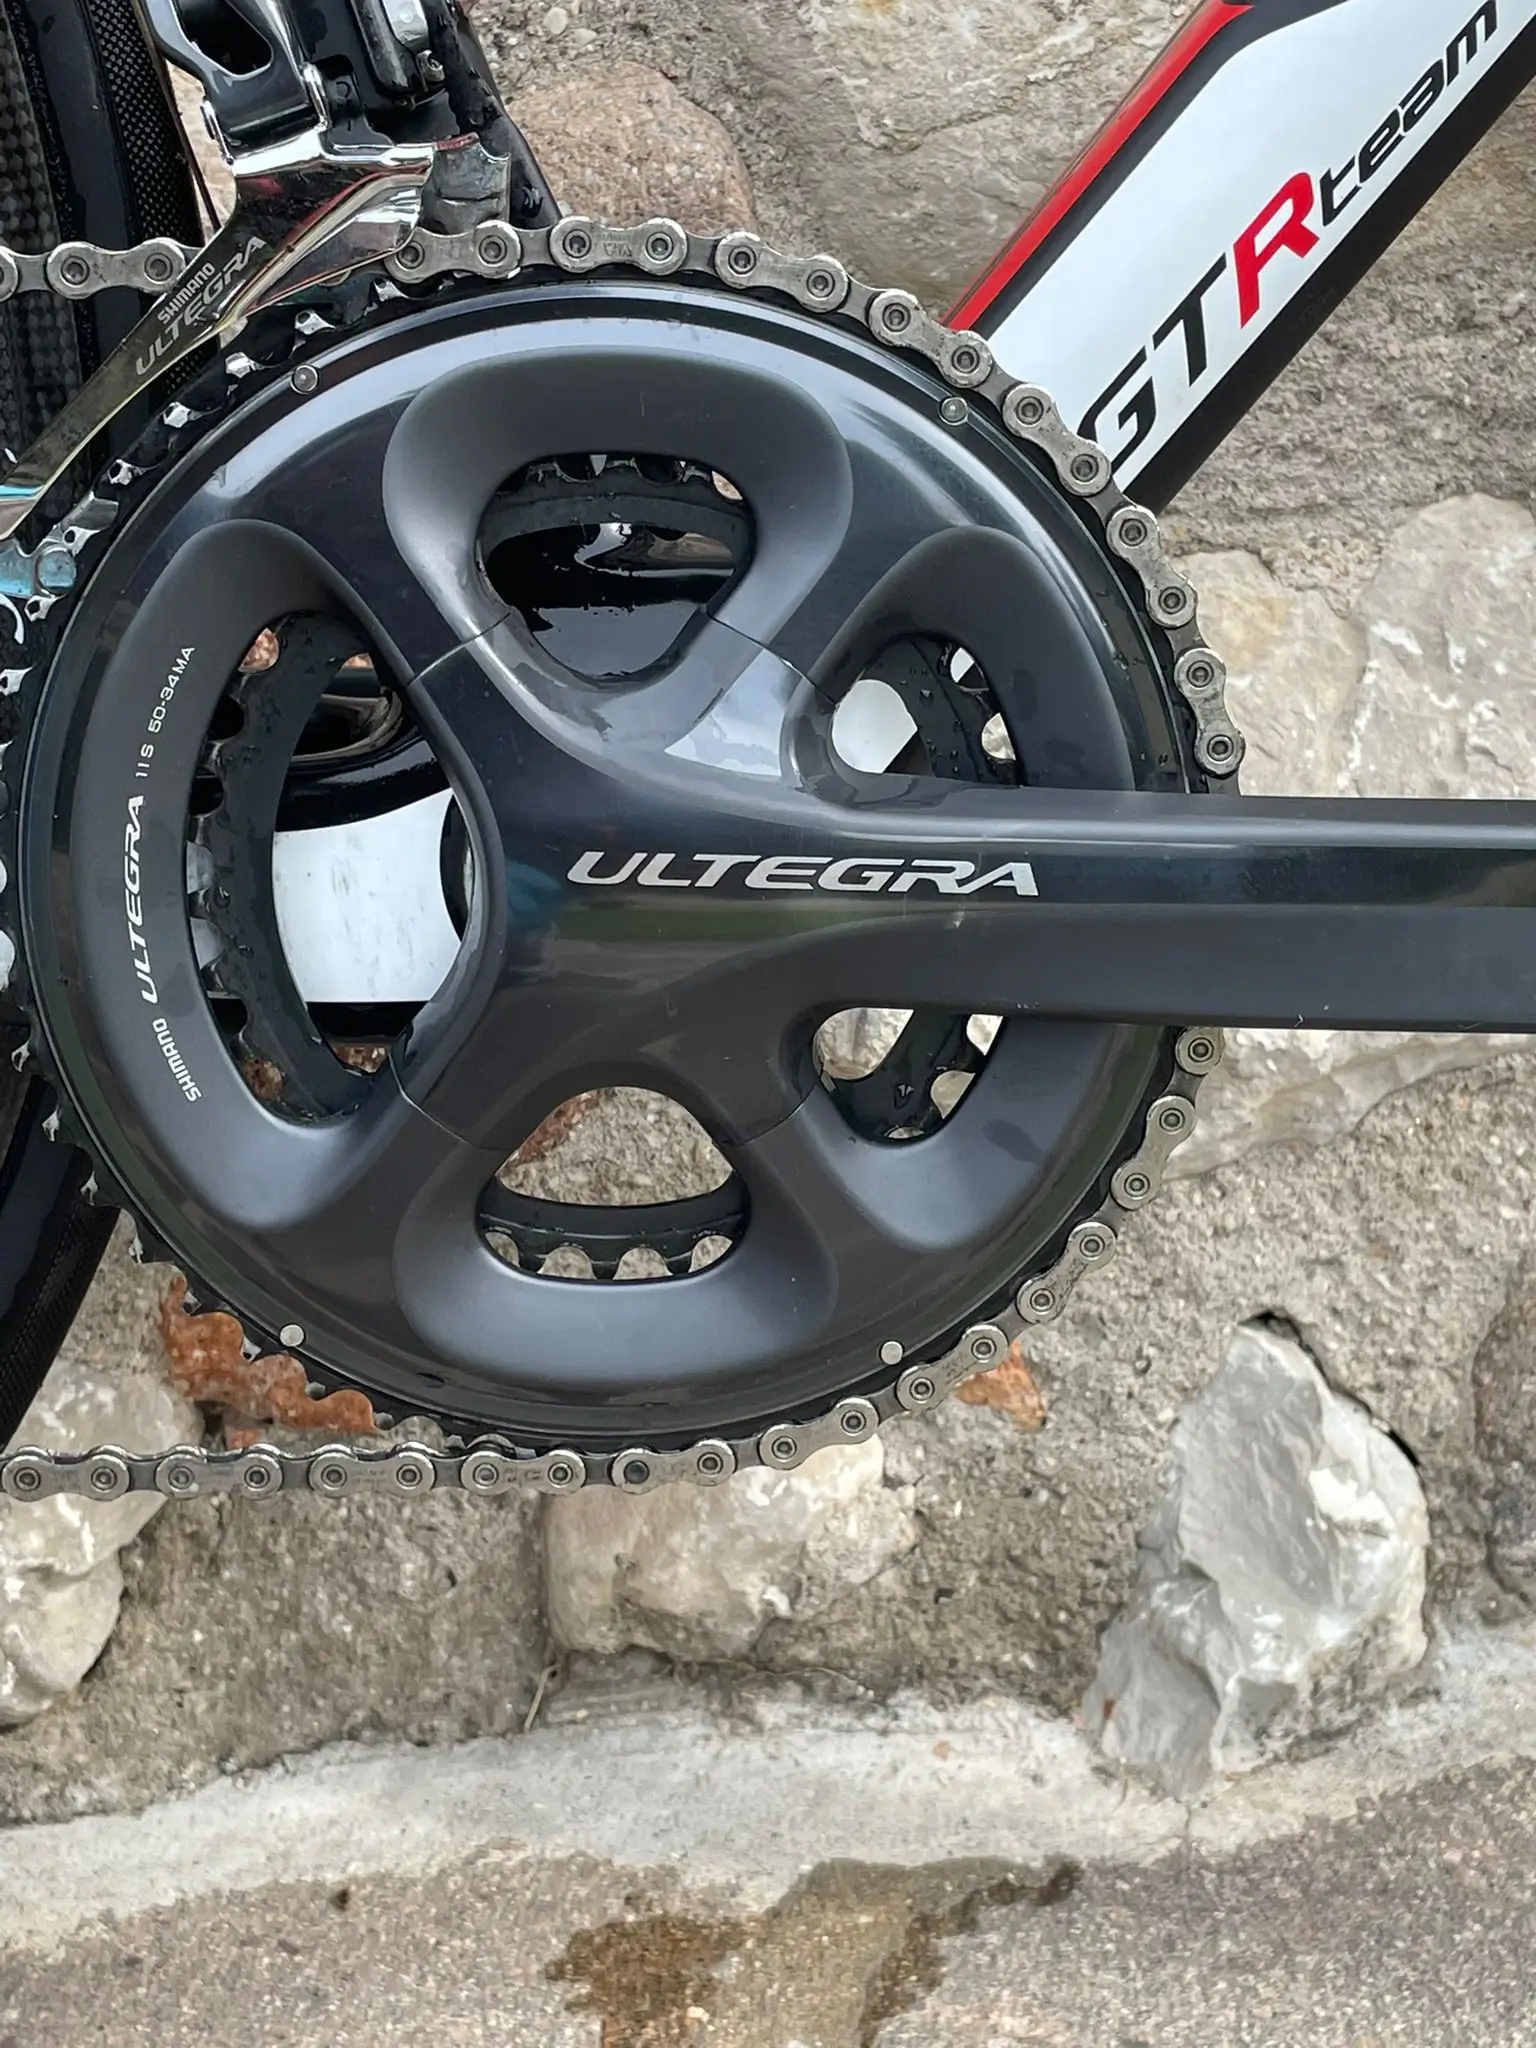 Wilier GTR Team SHIMANO ULTEGRA used in S | buycycle USA